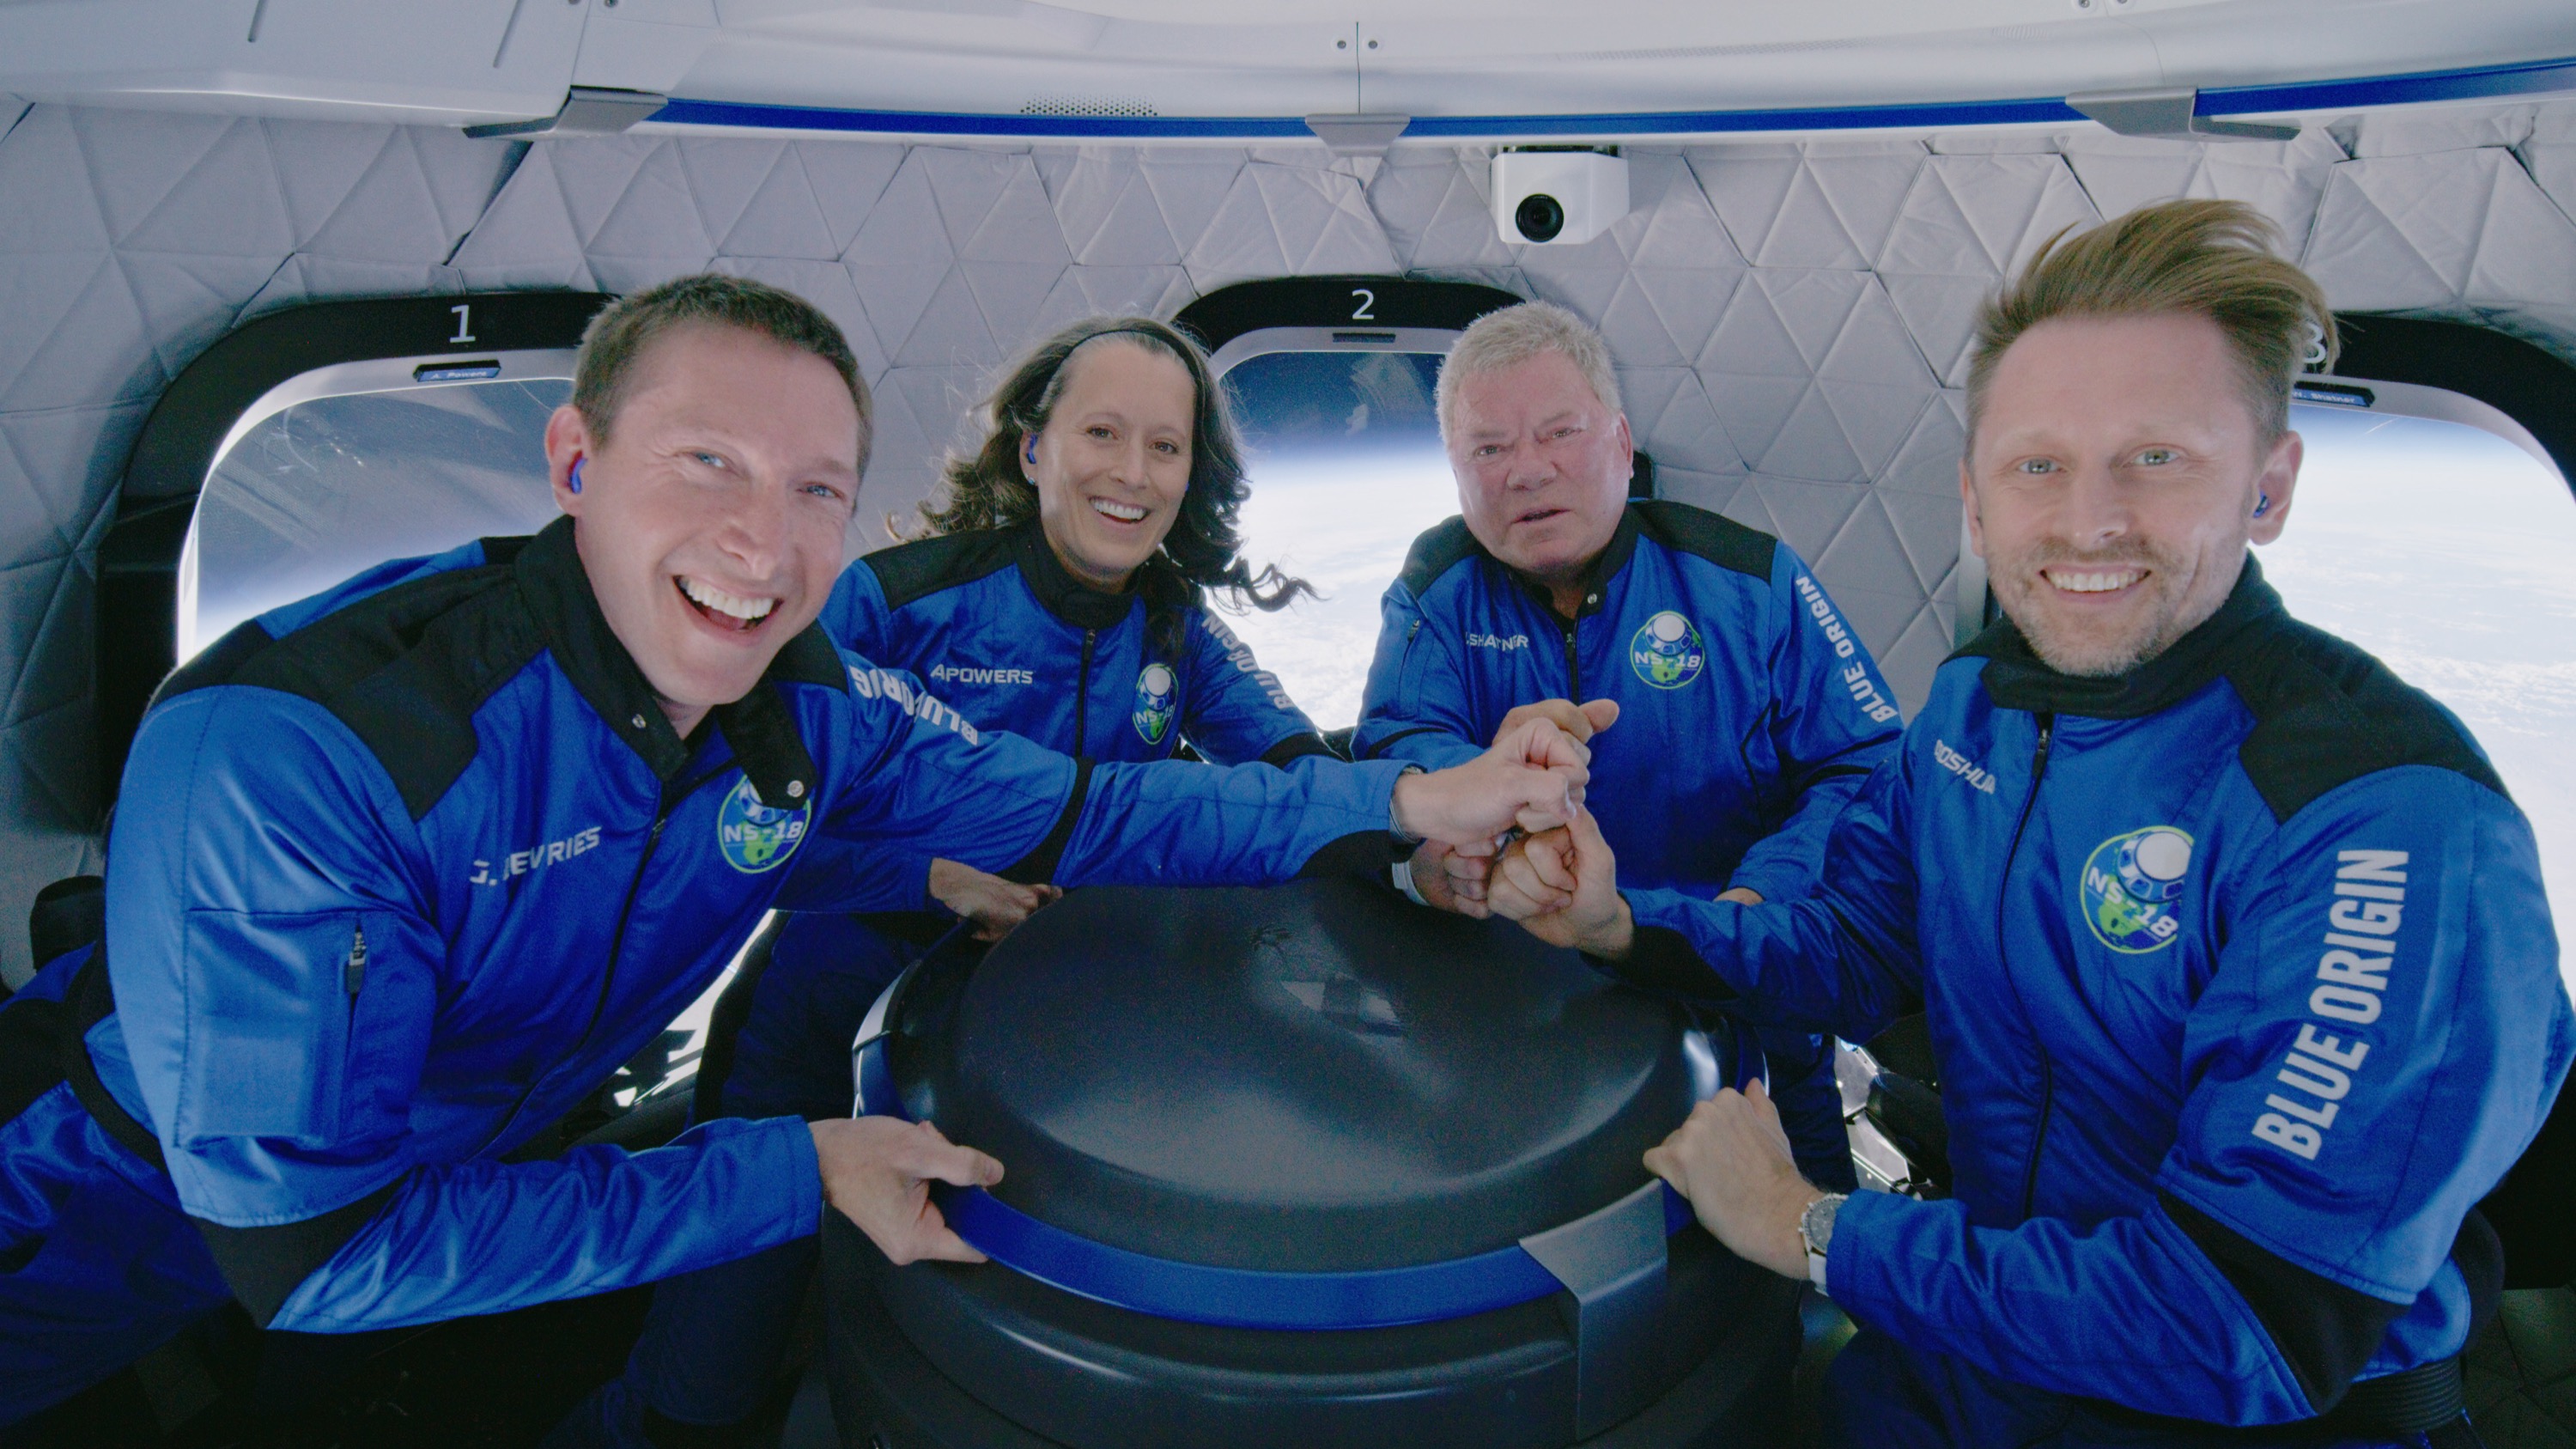 In a Blue Origin Rocket, William Shatner Finally Goes to Space